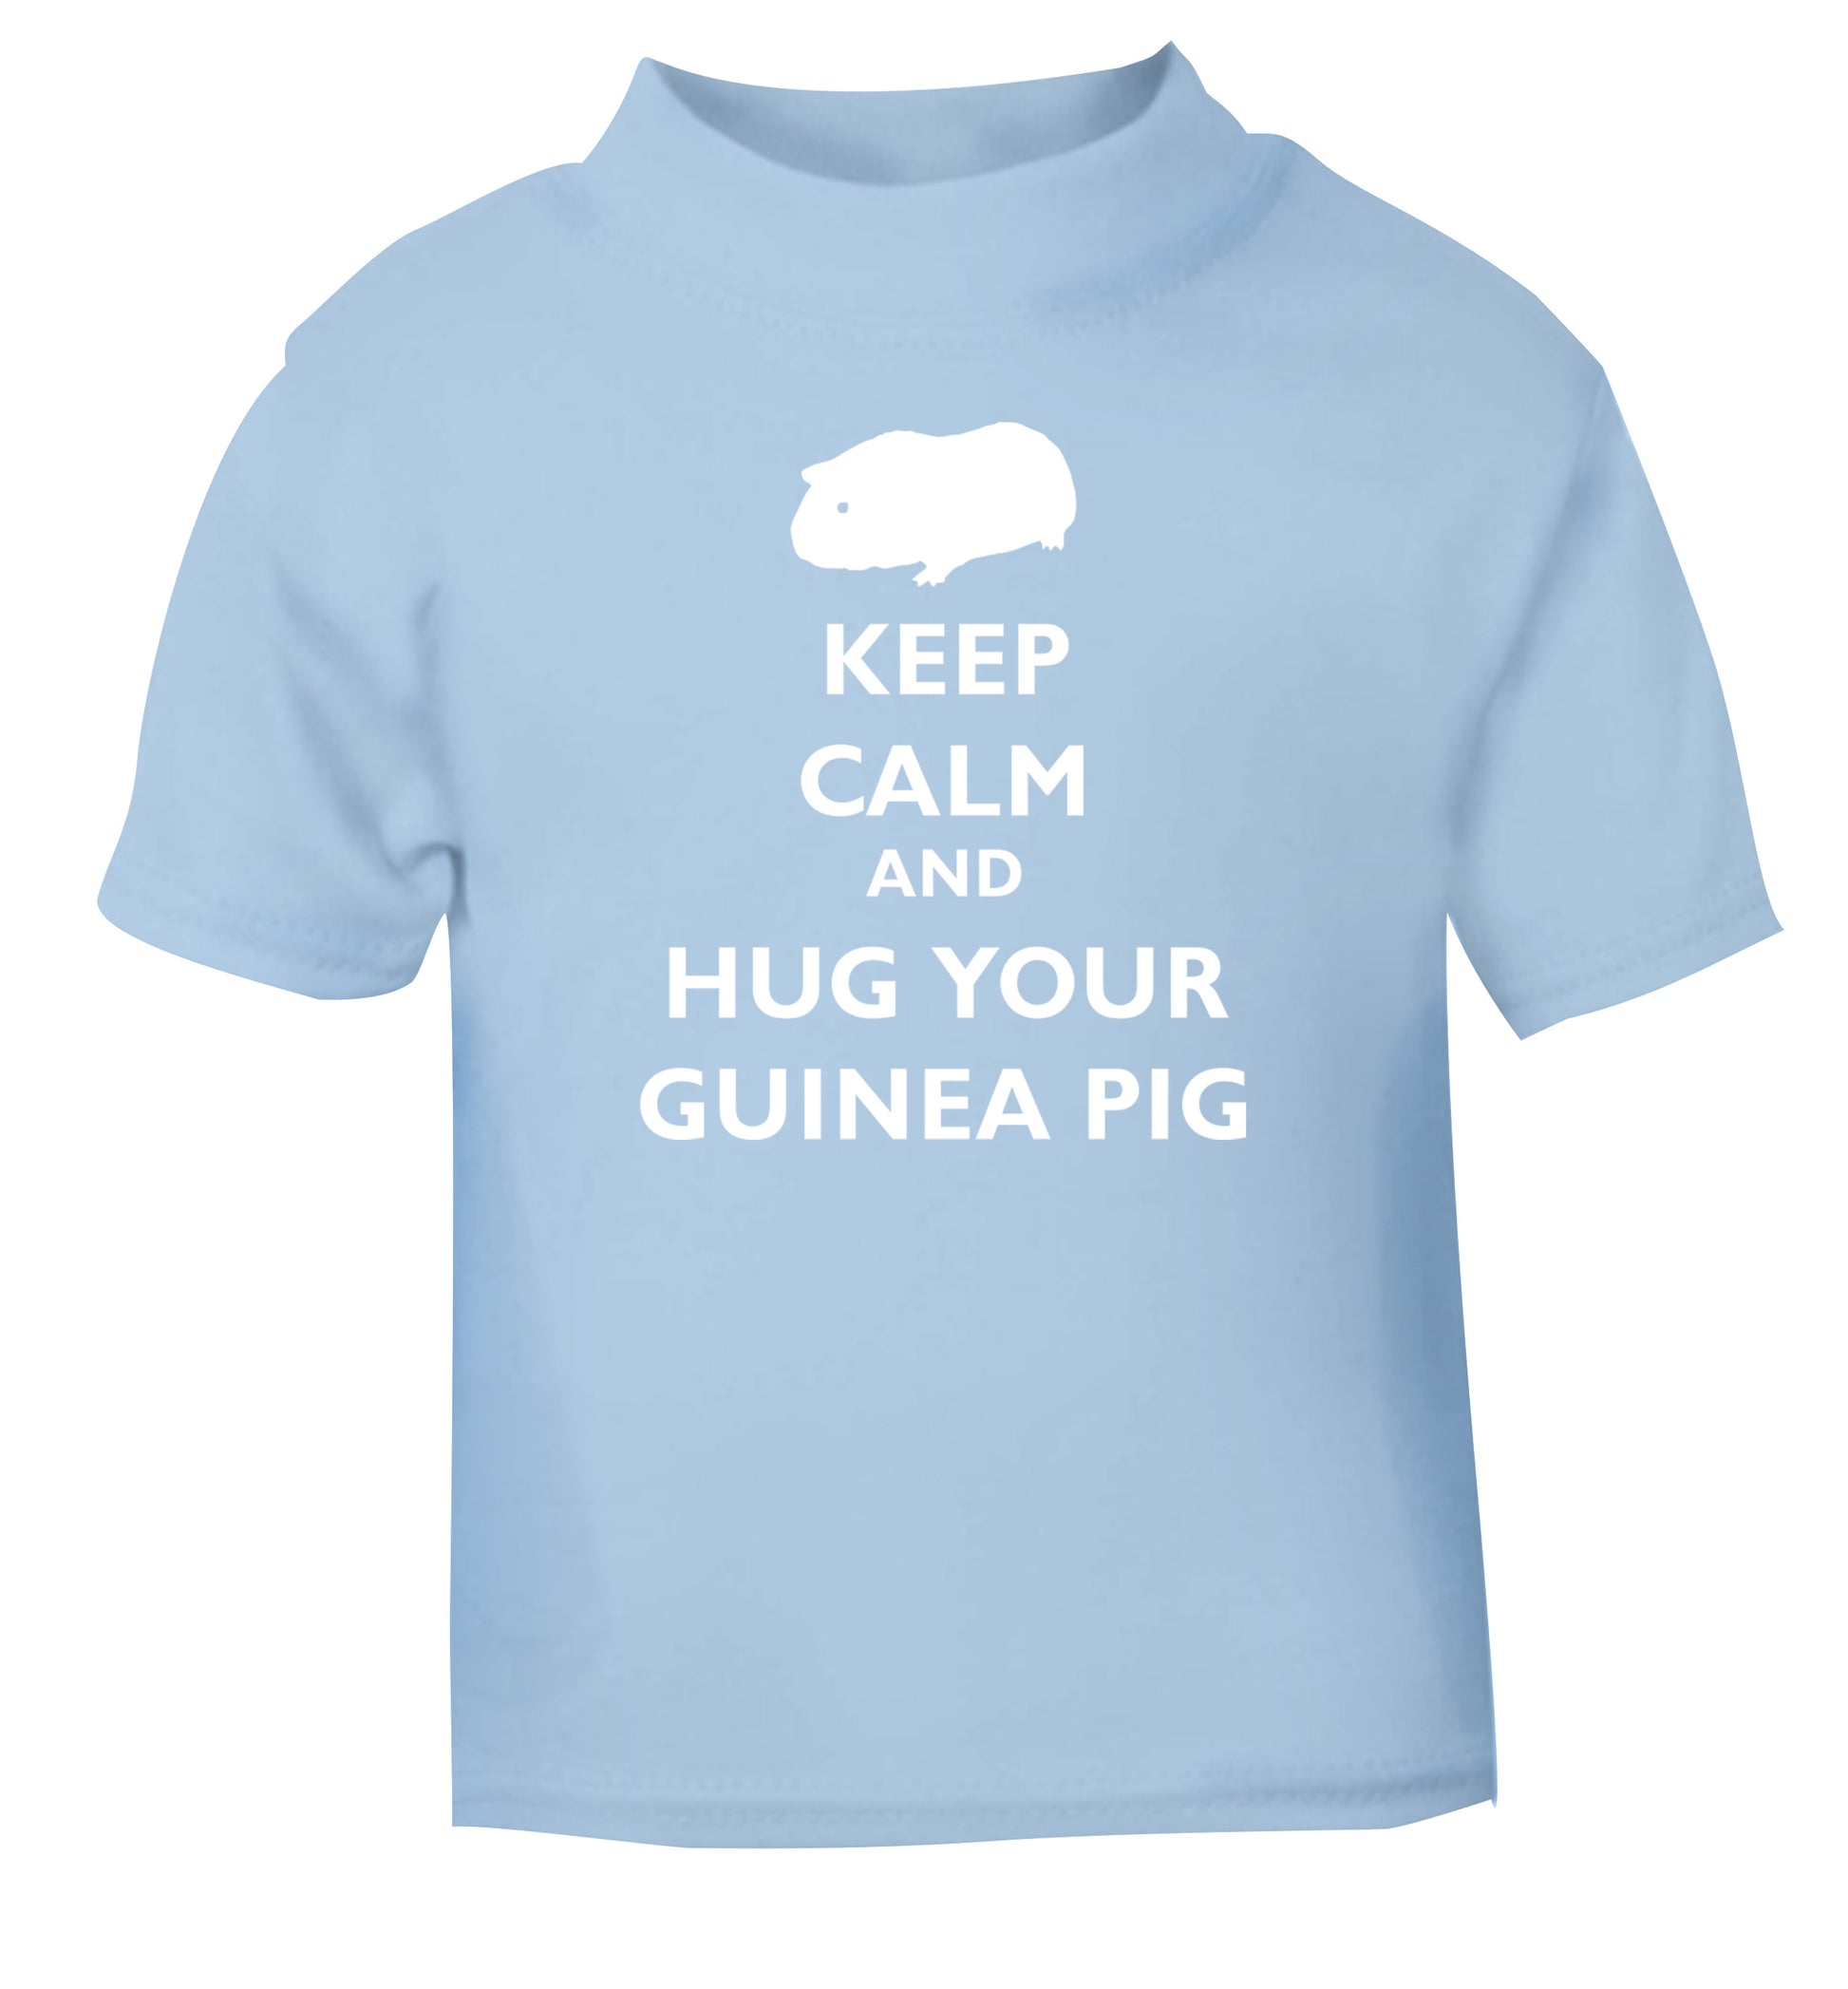 Keep calm and hug your guineapig light blue Baby Toddler Tshirt 2 Years